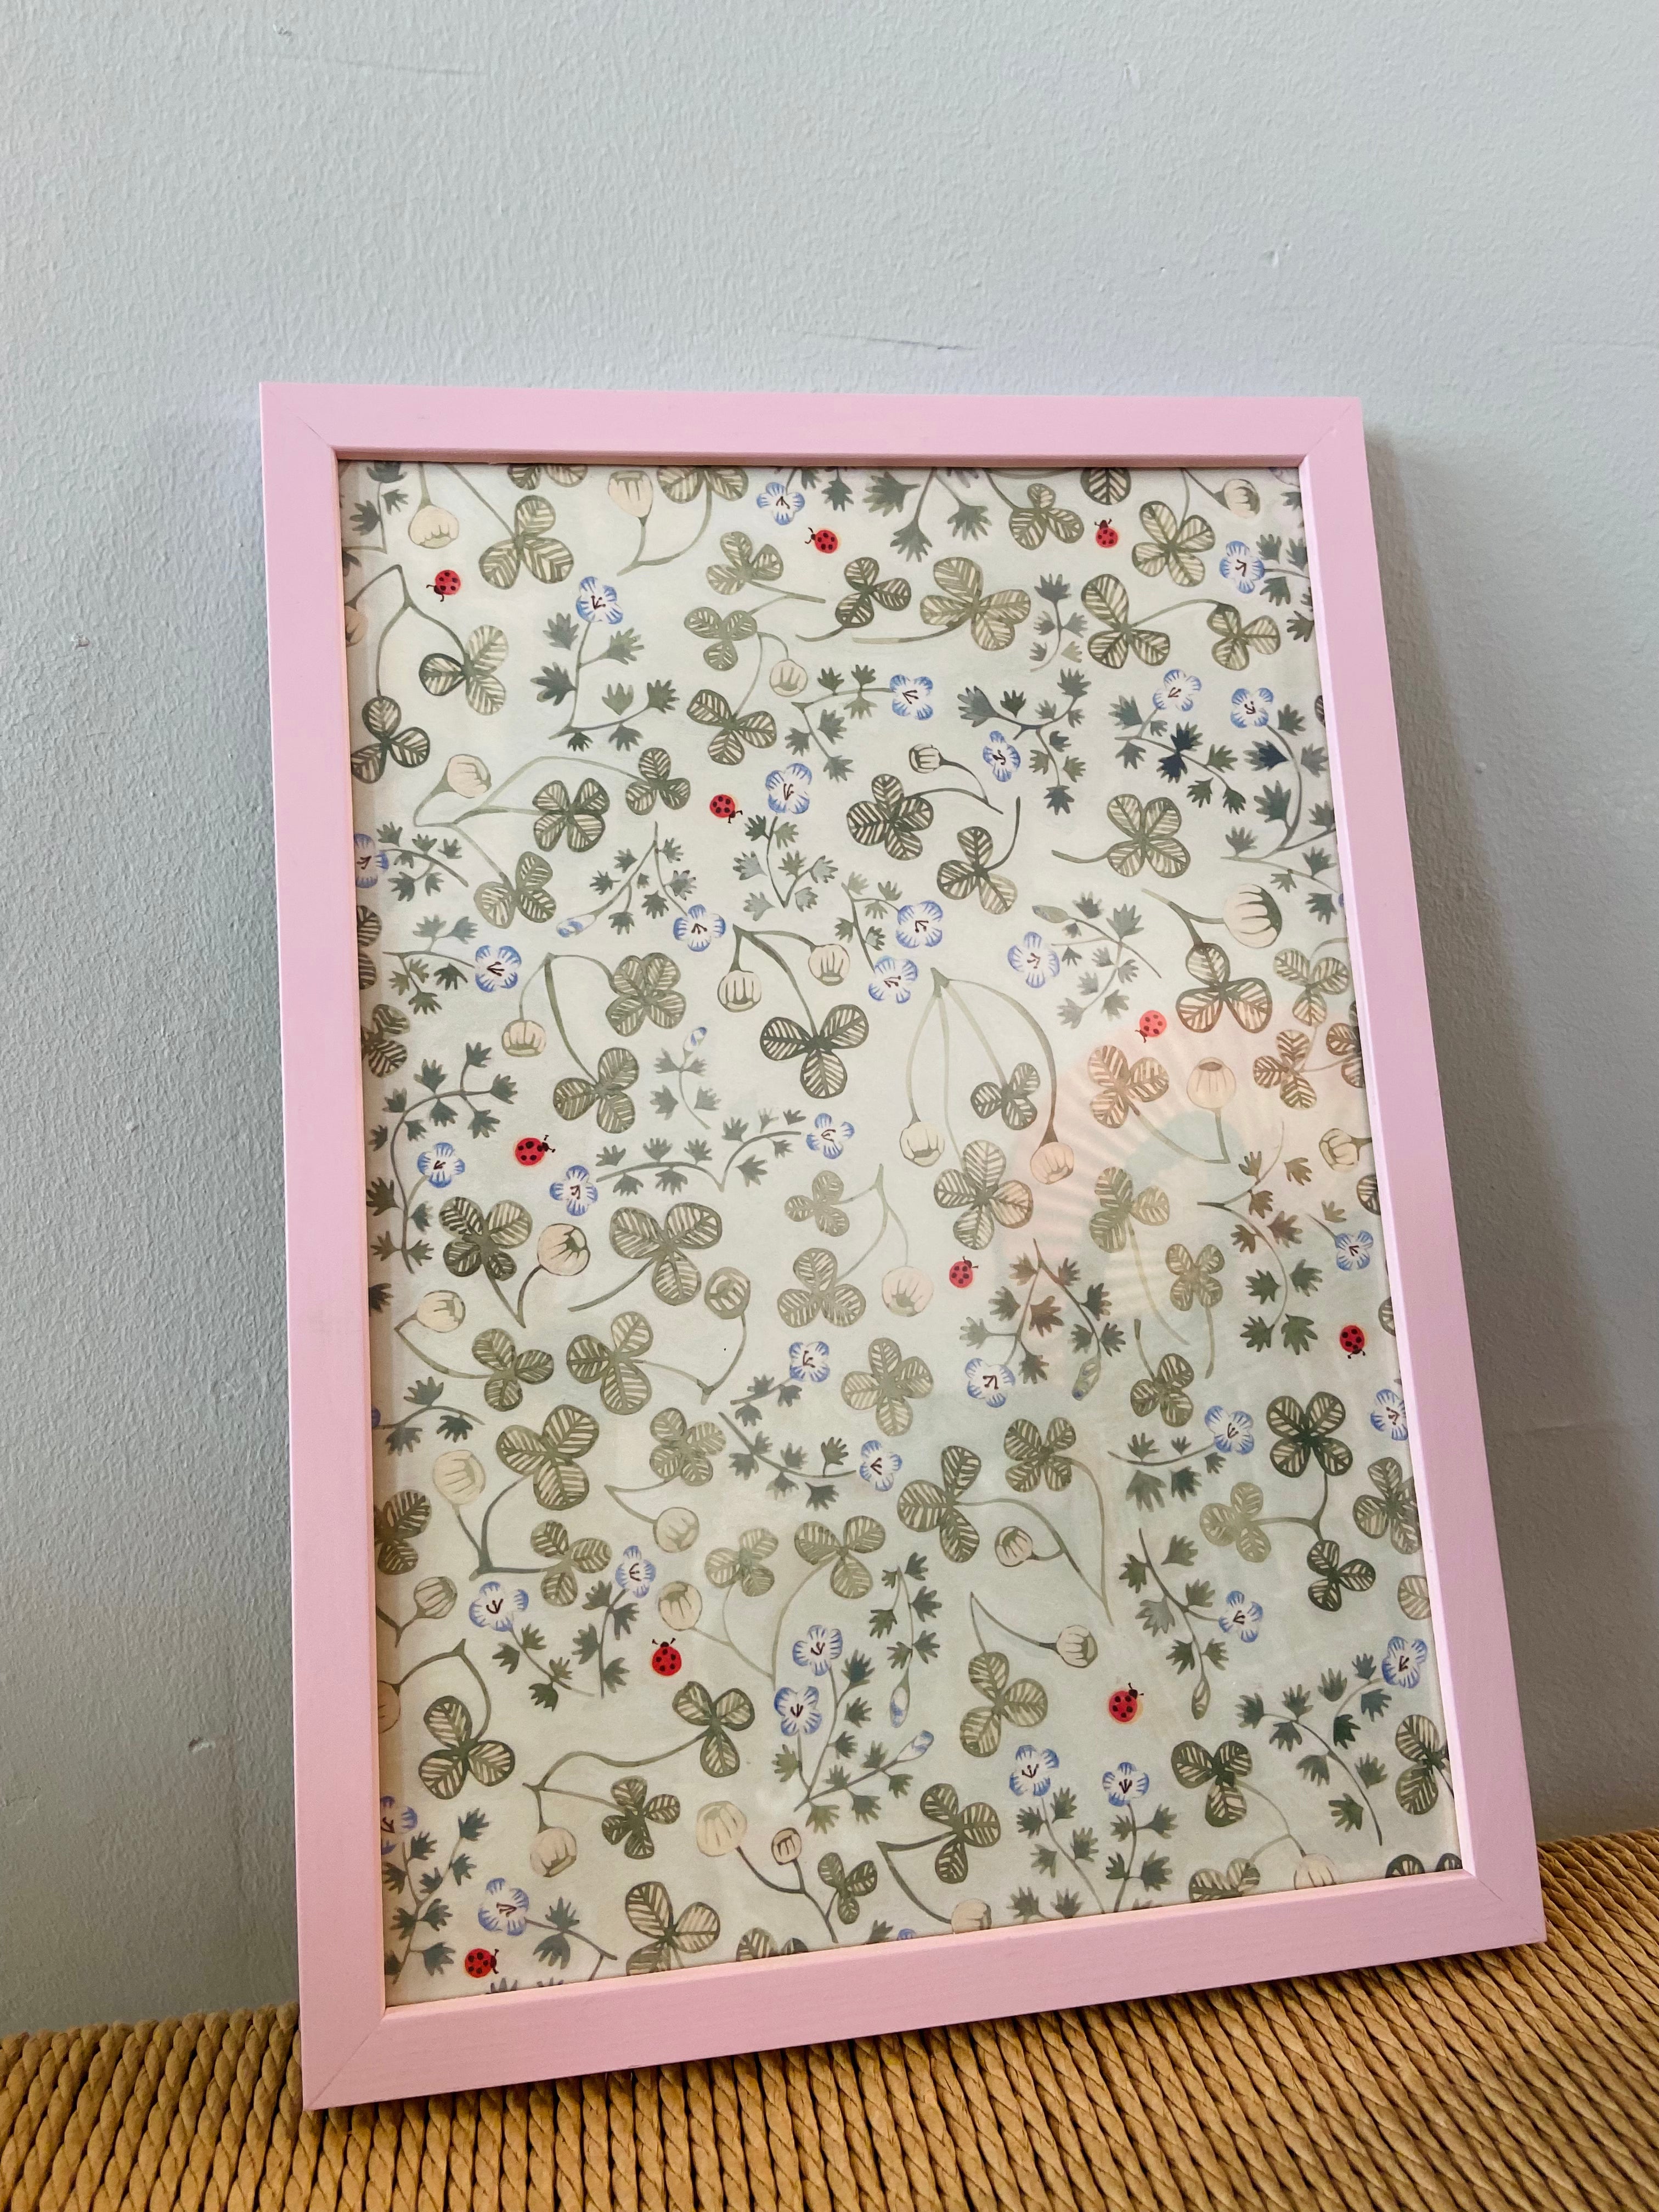 Clover with ladybirds in a pink frame